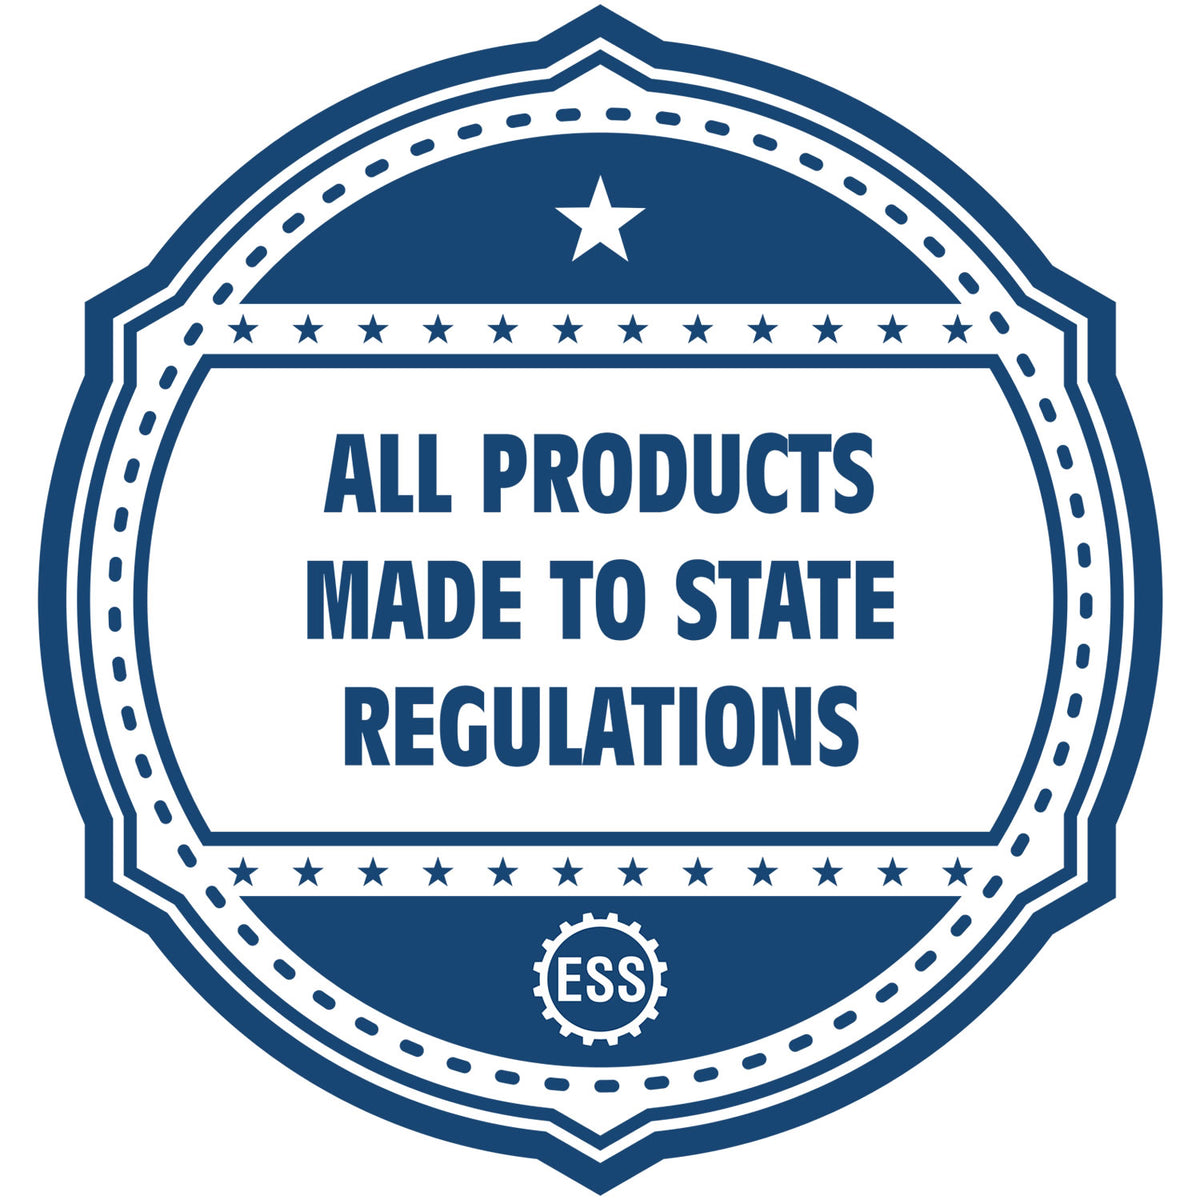 An icon or badge element for the Handheld Nevada Professional Engineer Embosser showing that this product is made in compliance with state regulations.